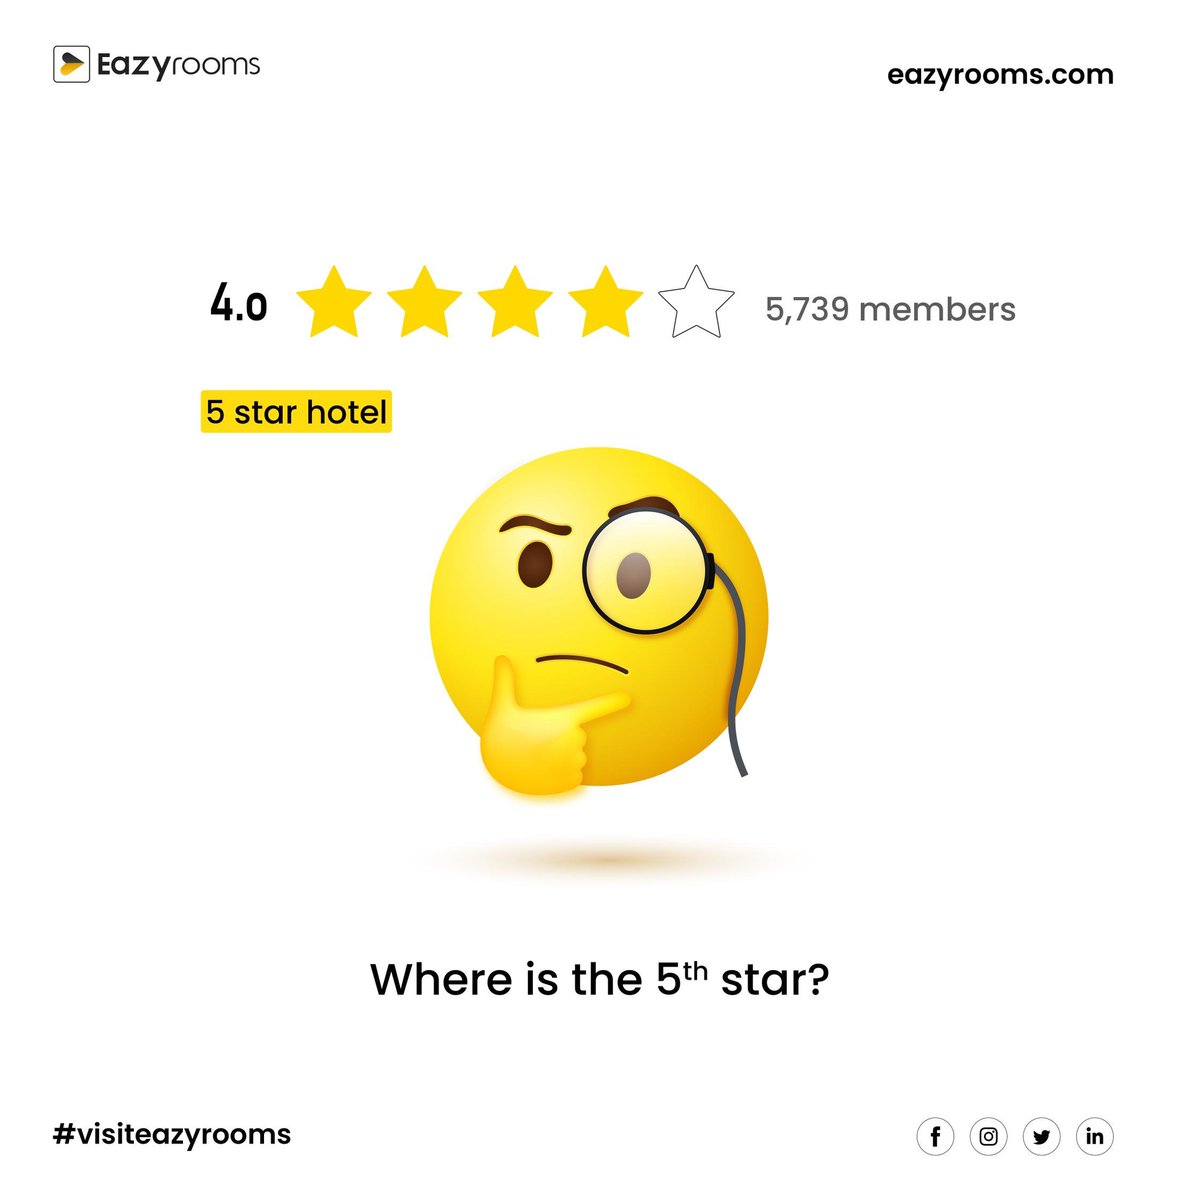 Give the best services to your customers with Eazyrooms, Which eventually become the 5star hotel

#EazyRooms #Hotelmemes #SmartRoomApp #RoomService #HotelTech #TravelTech #HotelService #HotelFoodOrders #HotelApplication #PlatformForHotels #HospitalityApp